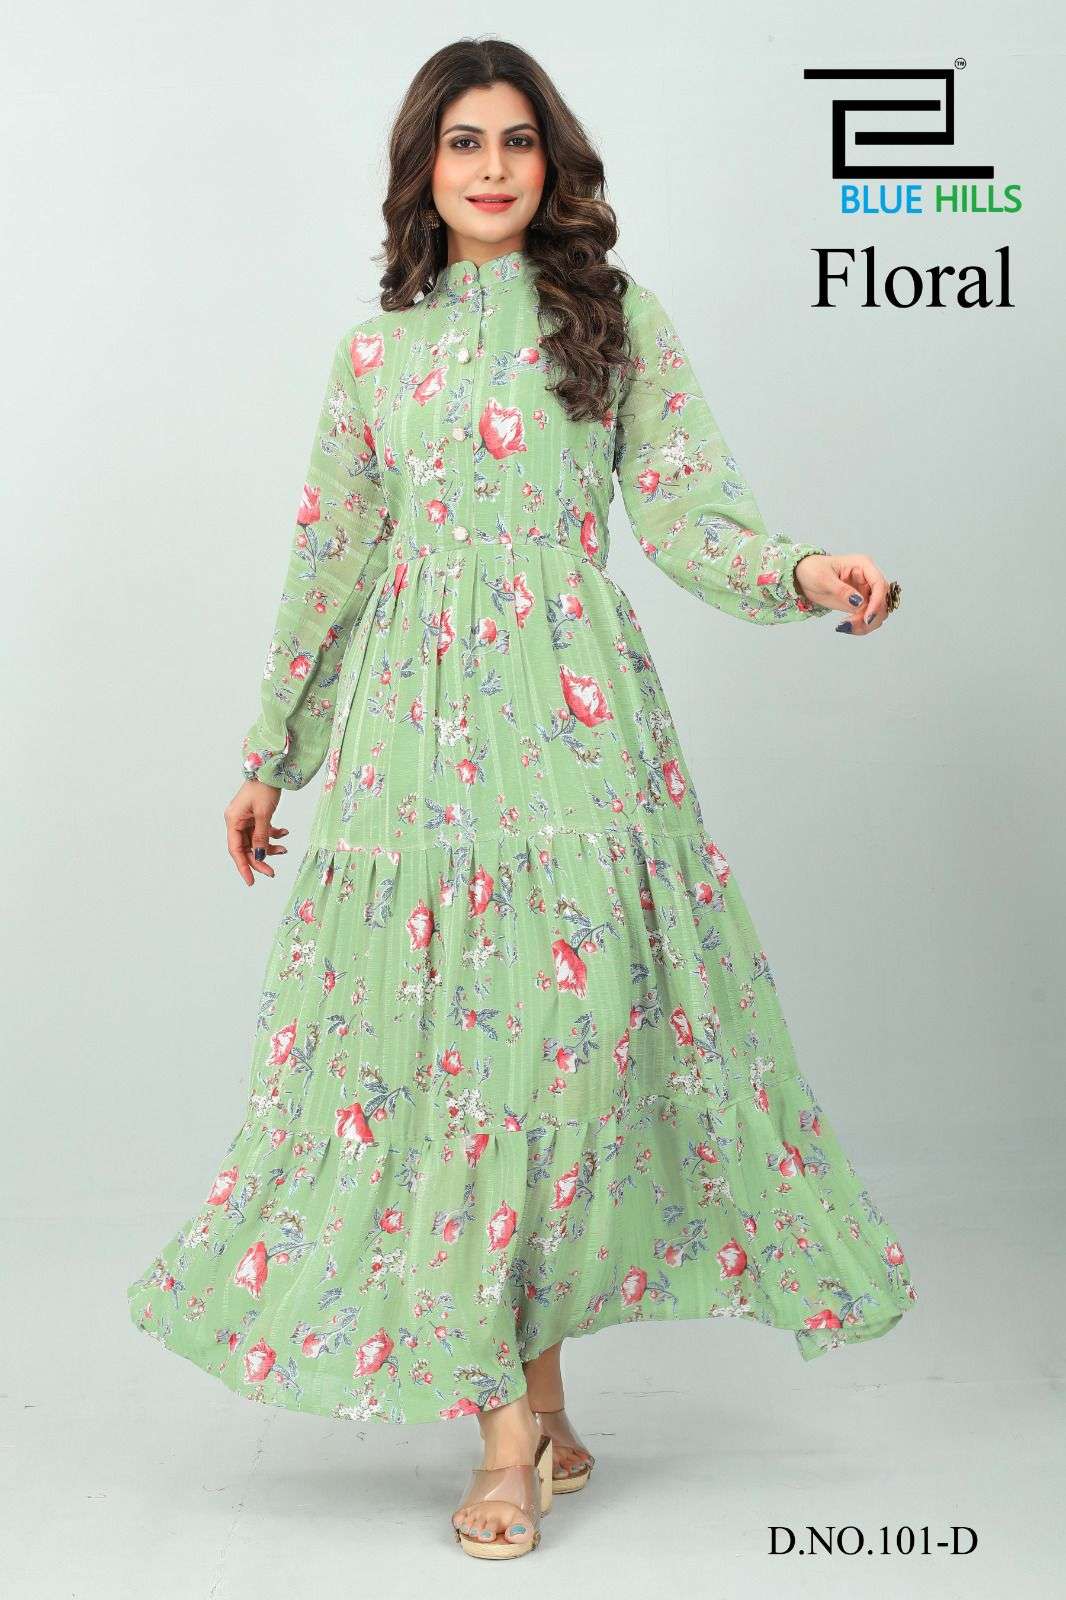 BLUE HILLS FLORAL DESIGNER CHIFFON LINING LONG GOWNS IN BEST WHOLESALE RATE